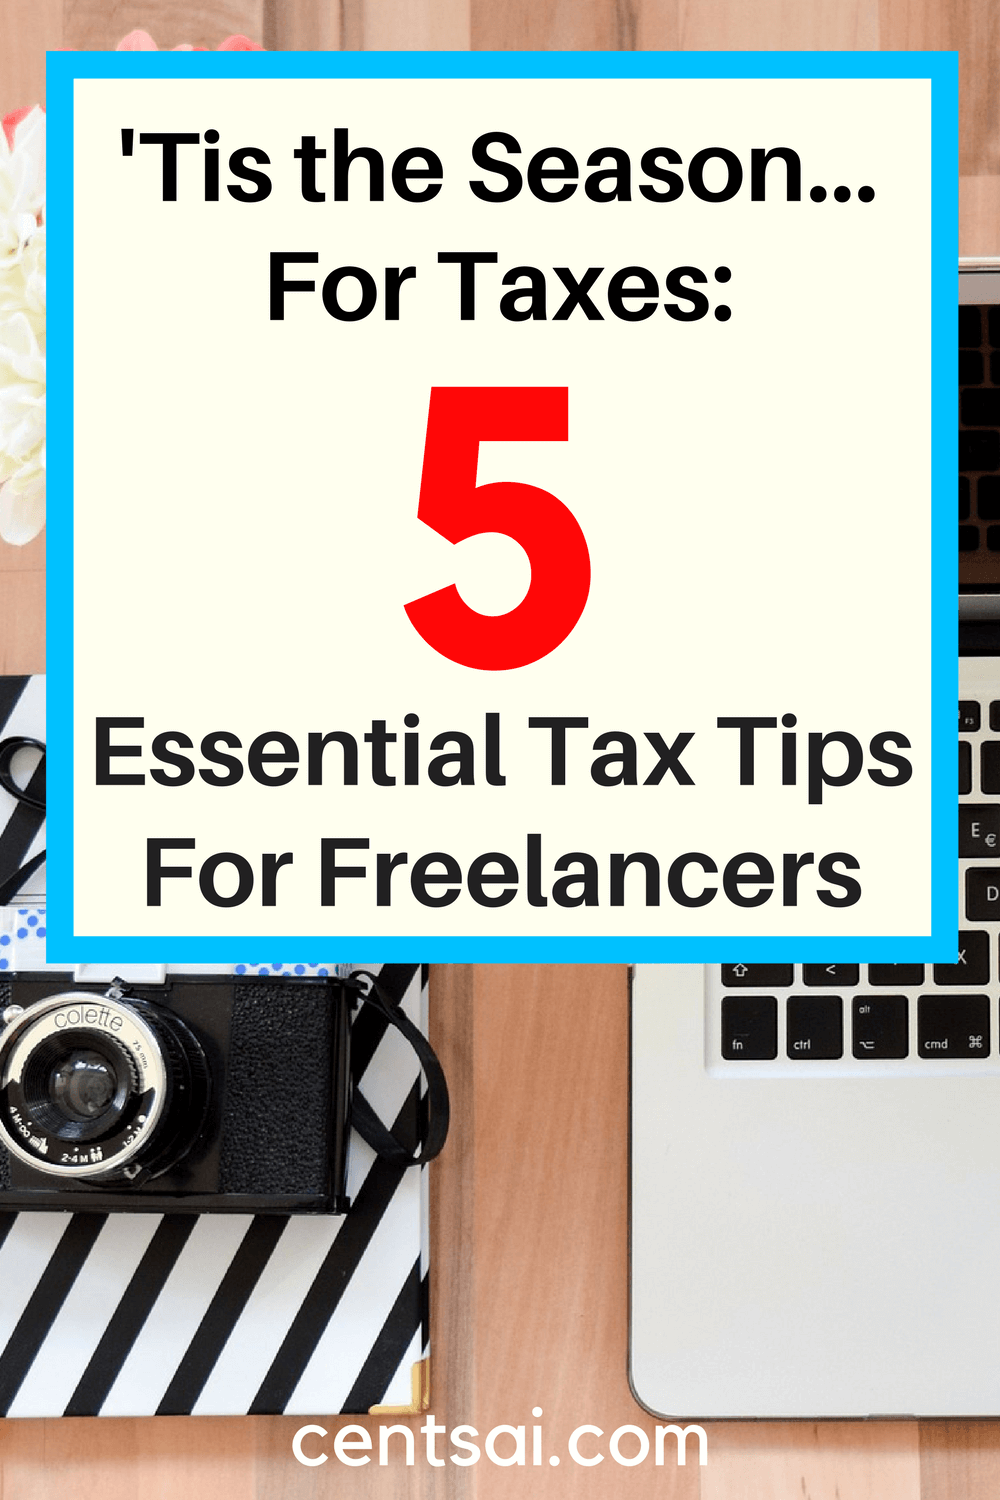 'Tis the Season... for Taxes: 5 Essential Tips for Filing Taxes as a Freelancer